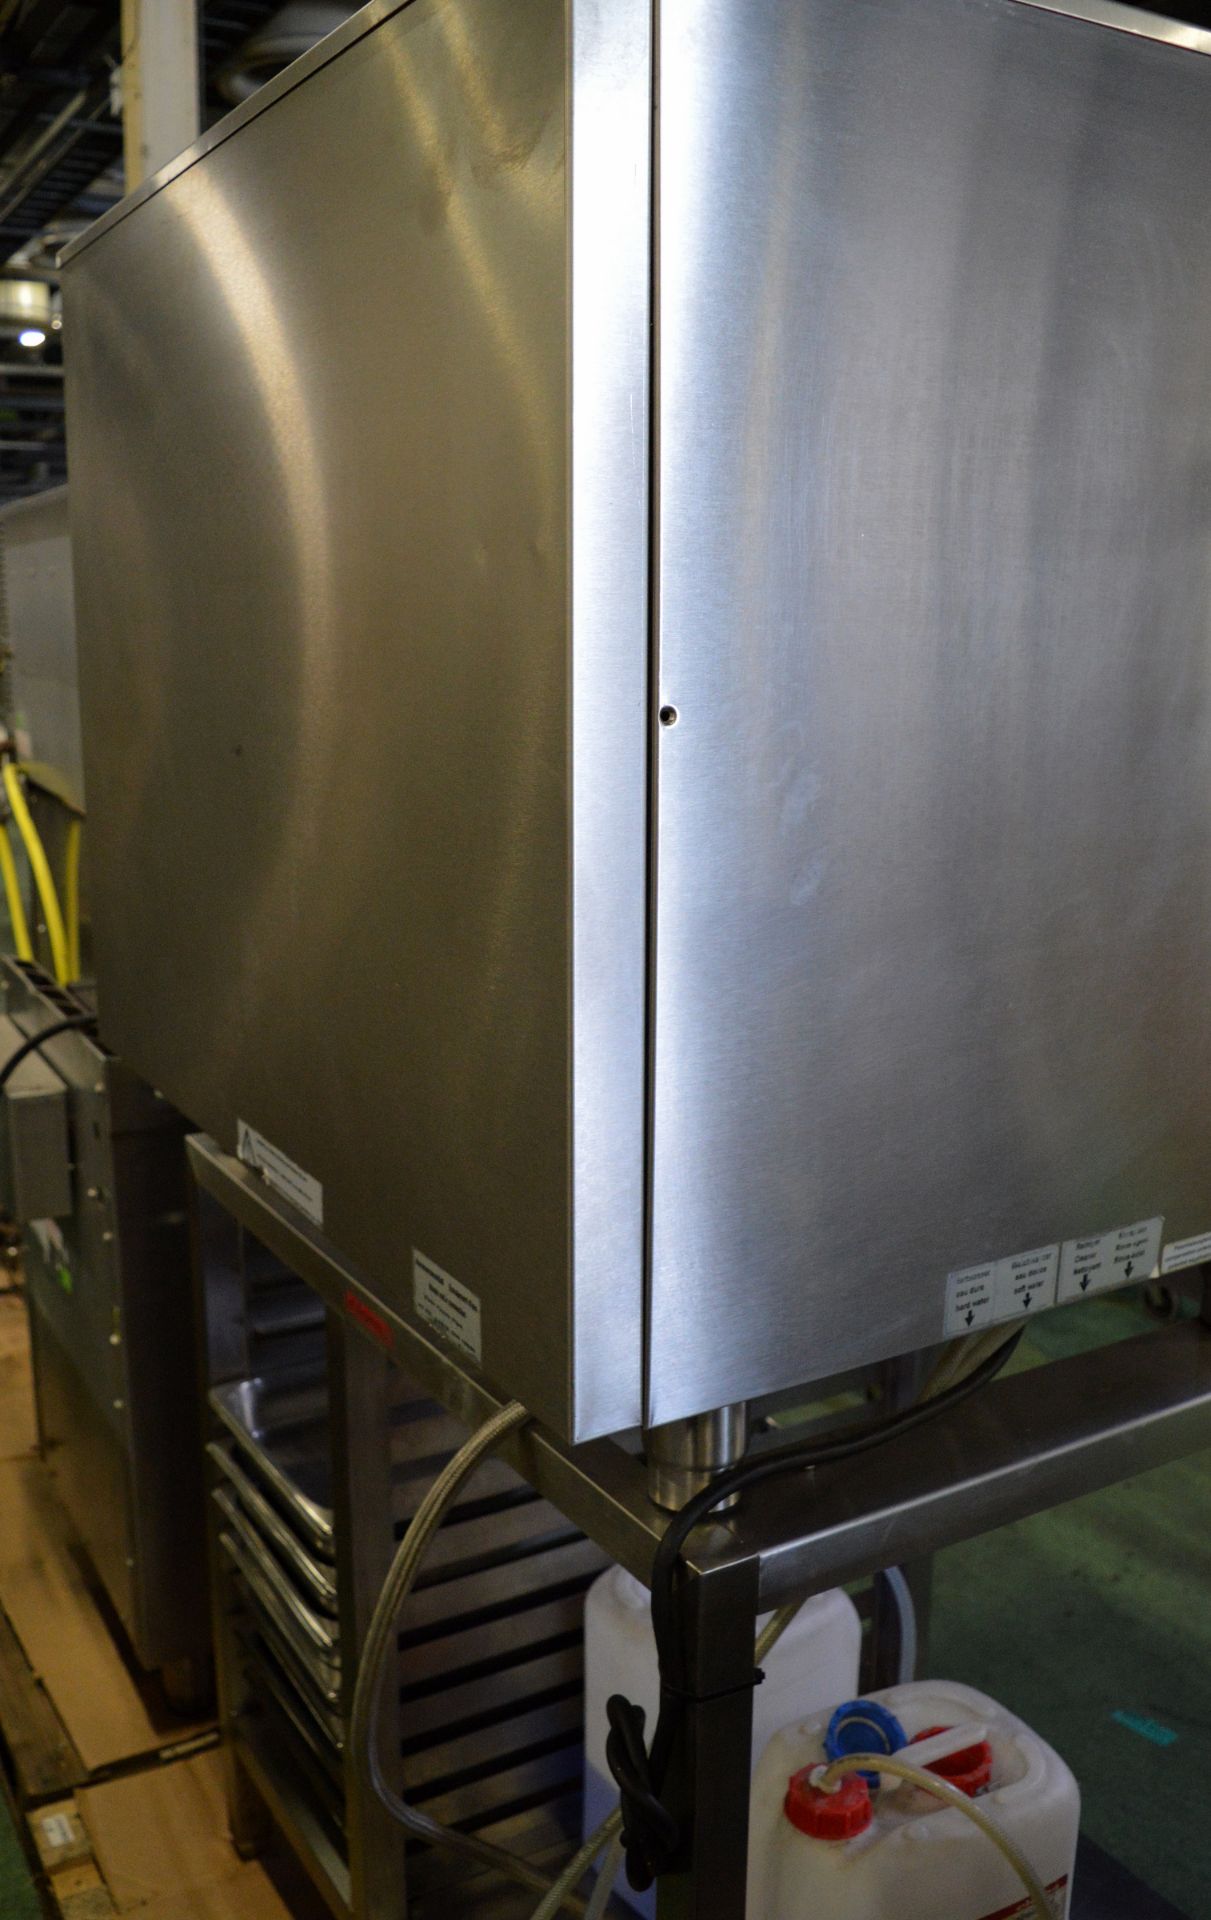 Eloma Multimax B6-11 Stainless steel CombiOven with stand L 930mm x W 850mm x H 1700mm - Image 10 of 11